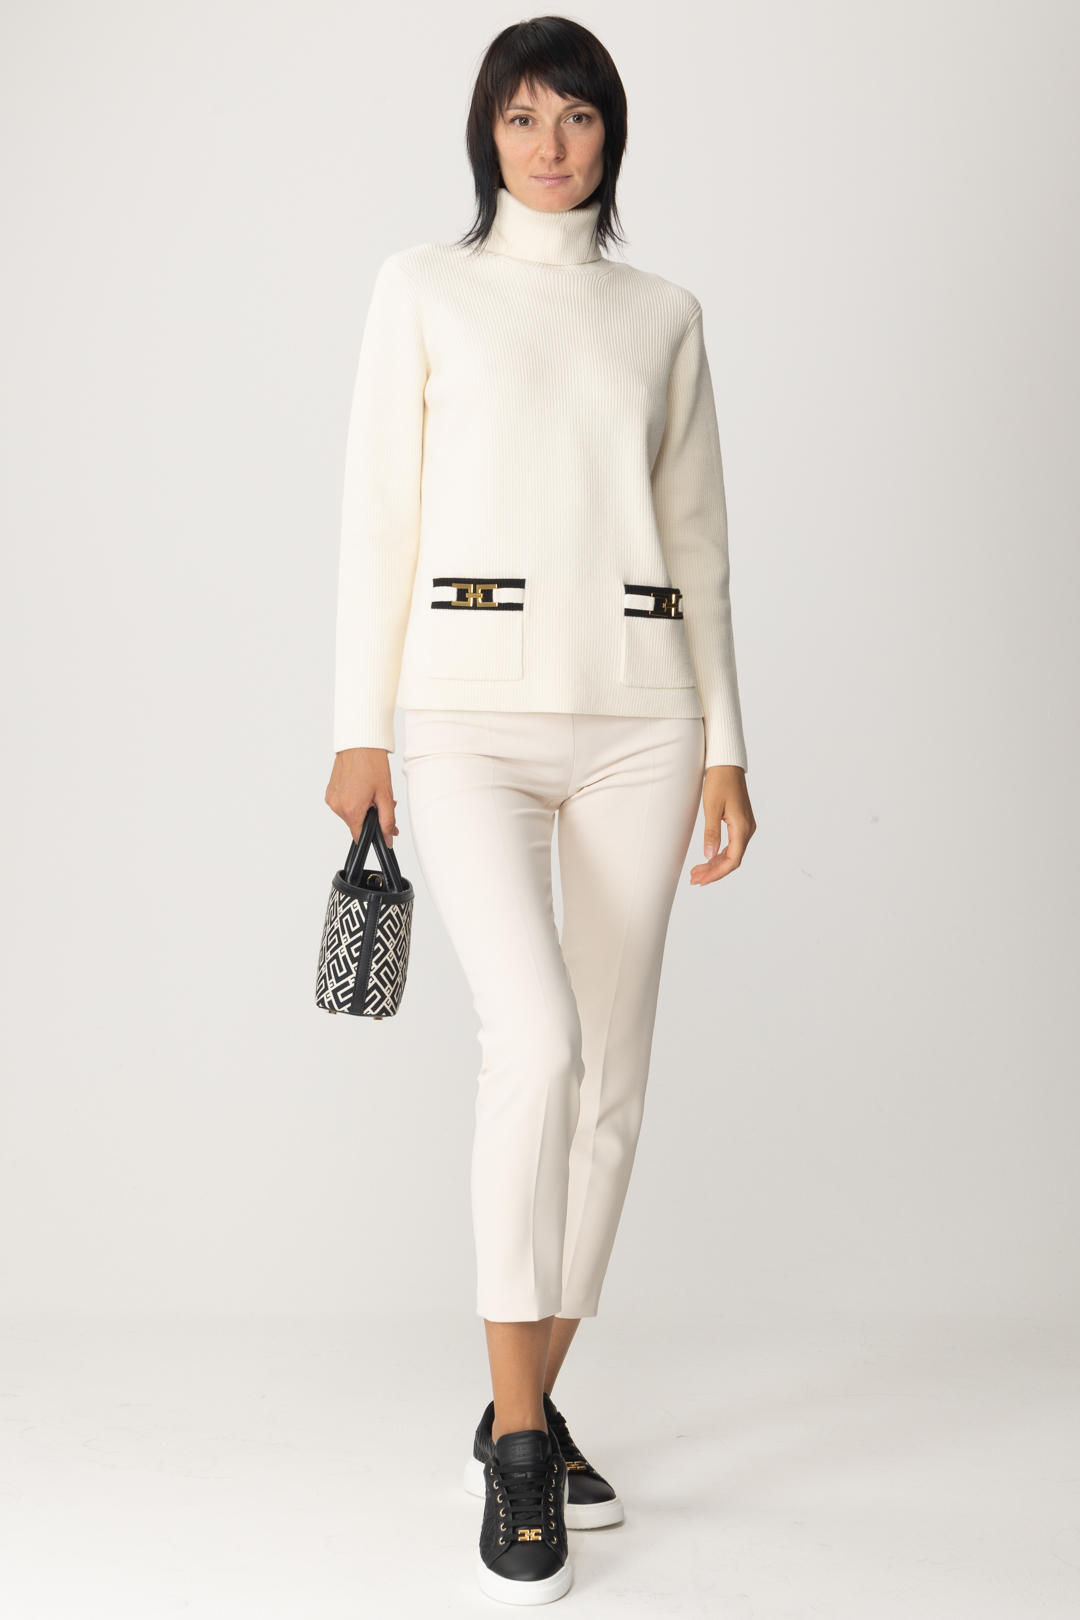 Preview: Elisabetta Franchi Turtleneck with branded clamps Burro/Nero